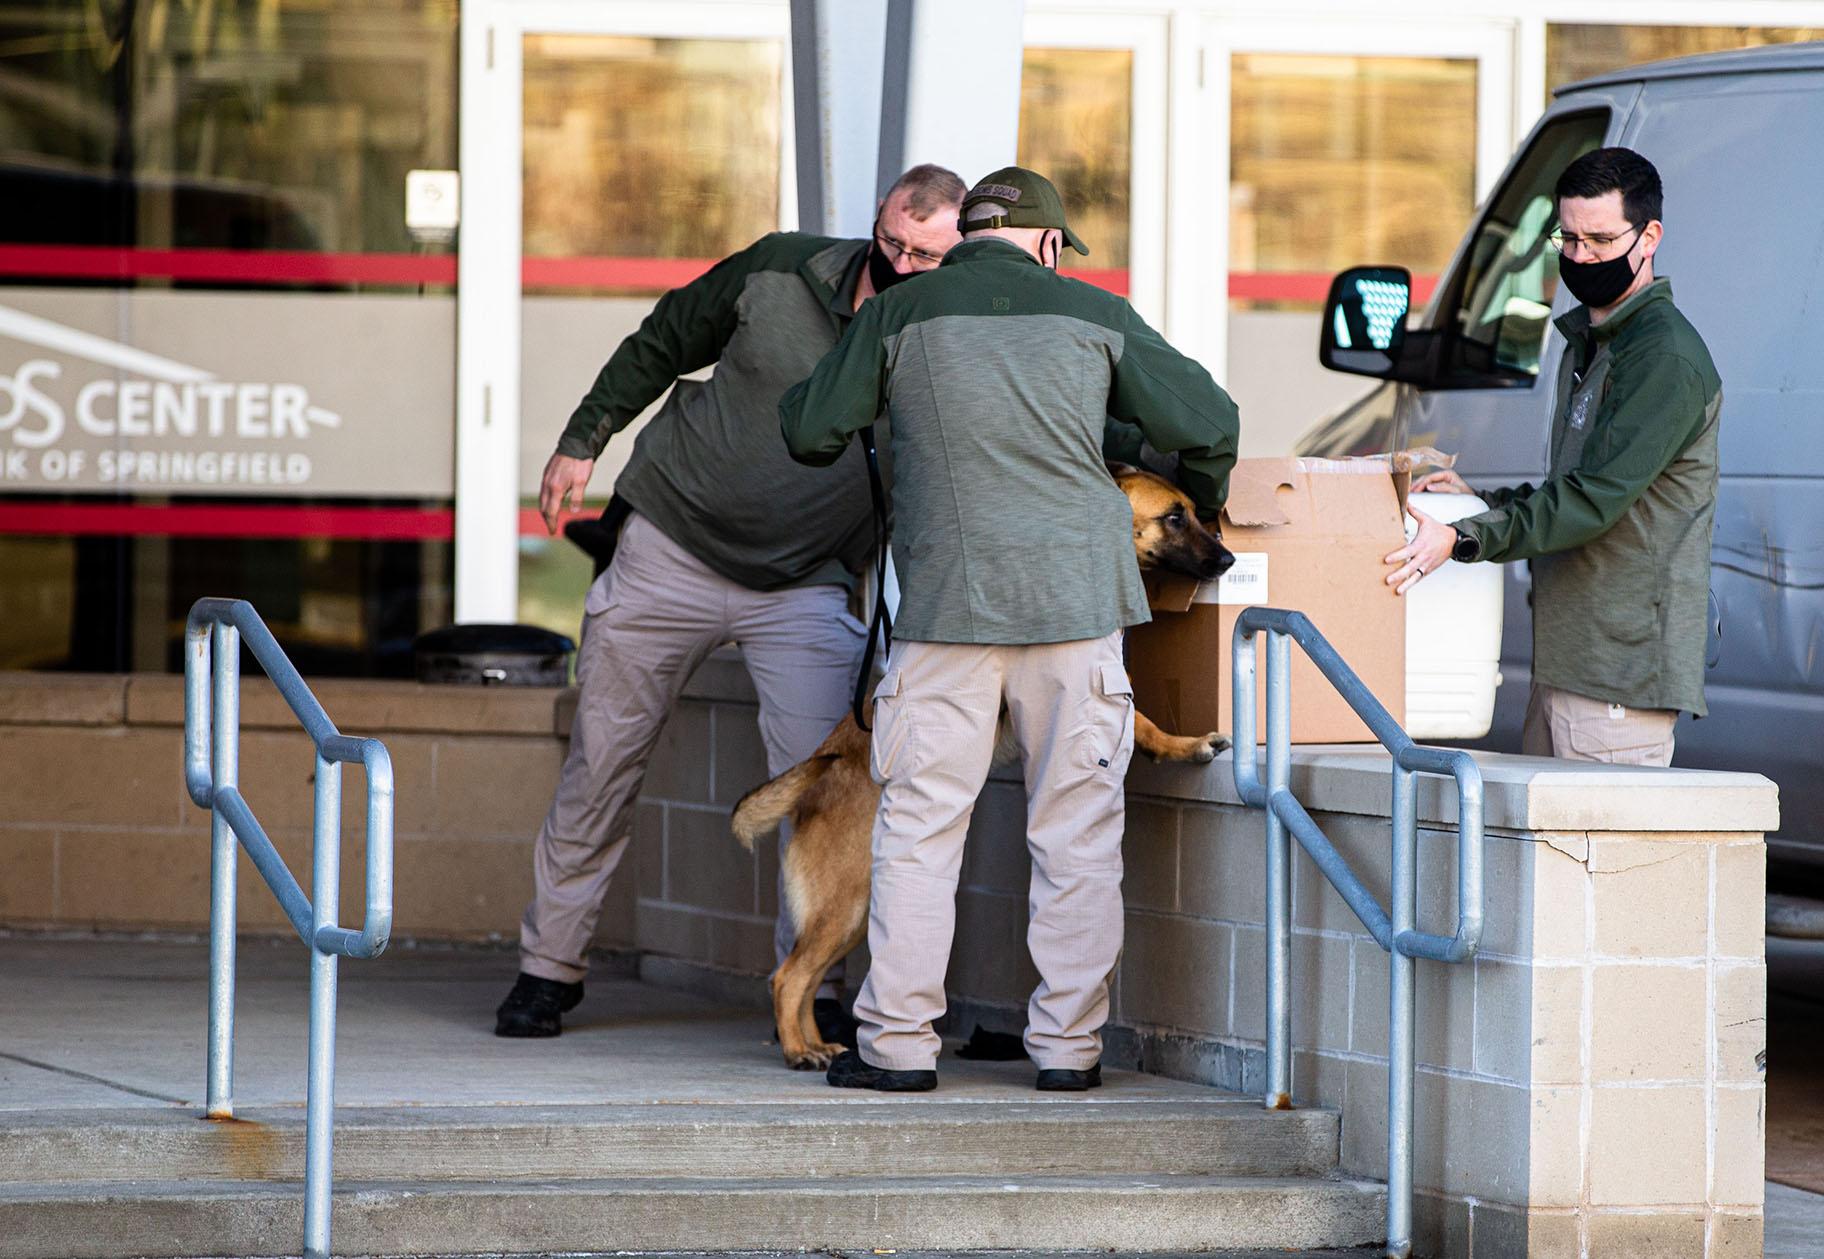 The Illinois State Police use a dog to check containers being delivered to the Bank of Springfield Center during the lame-duck session for the Illinois House of Representatives, Tuesday, January 12, 2021, in Springfield. (Justin L. Fowler / The State Journal-Register / Pool)